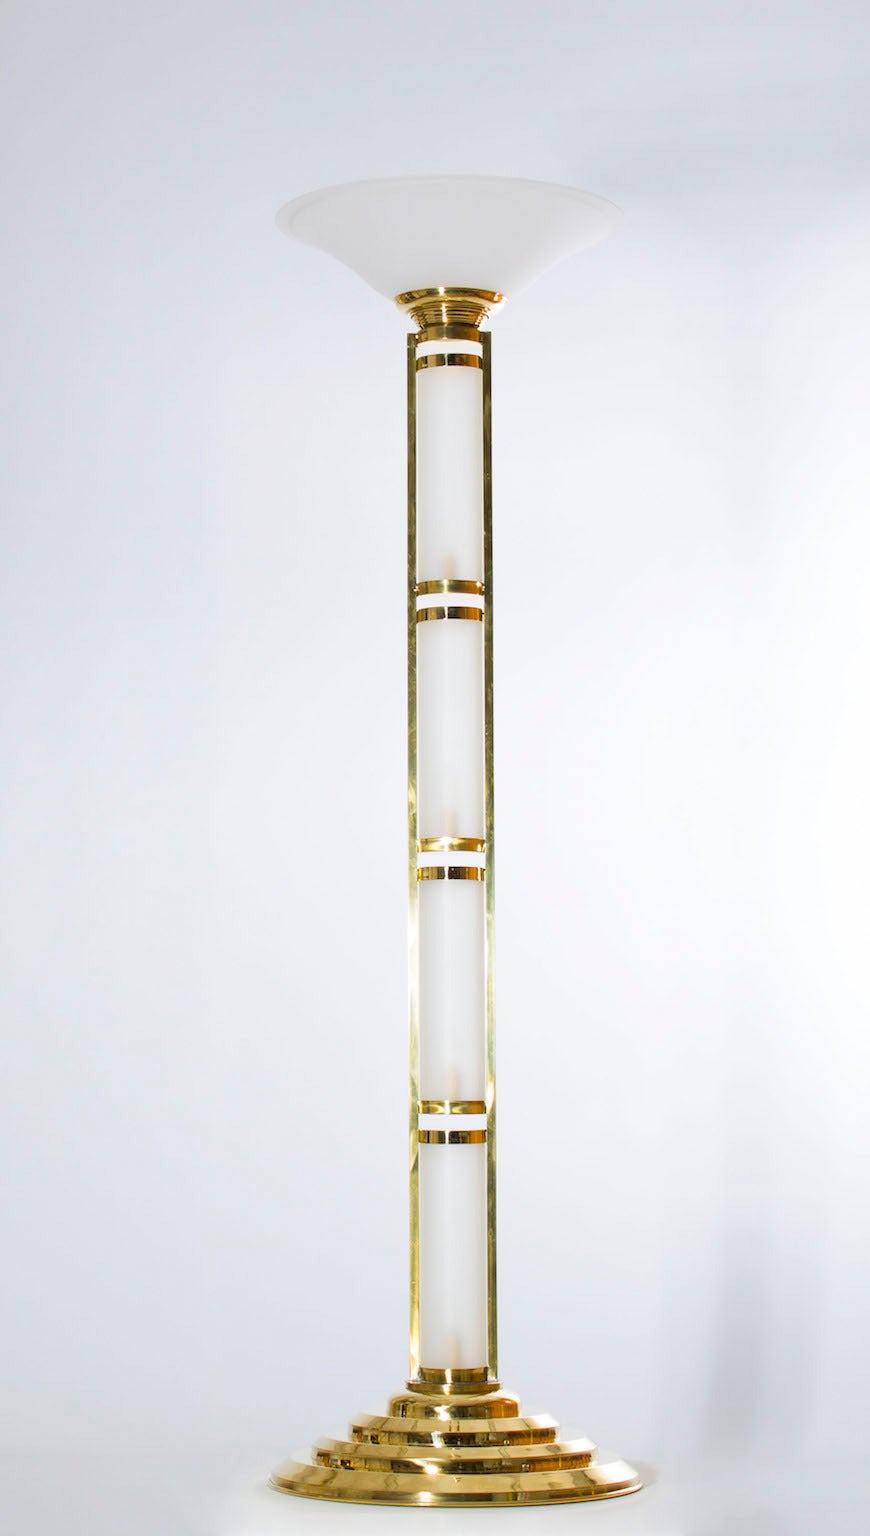 Elegant Murano floor lamps in excellent original condition circa 1960s, composed by four cylinders and a cup in sandblasted glass with a spectacular brass frame. The floor lamps are 77 inch high, by 27 inches diameter and having five lights.

We